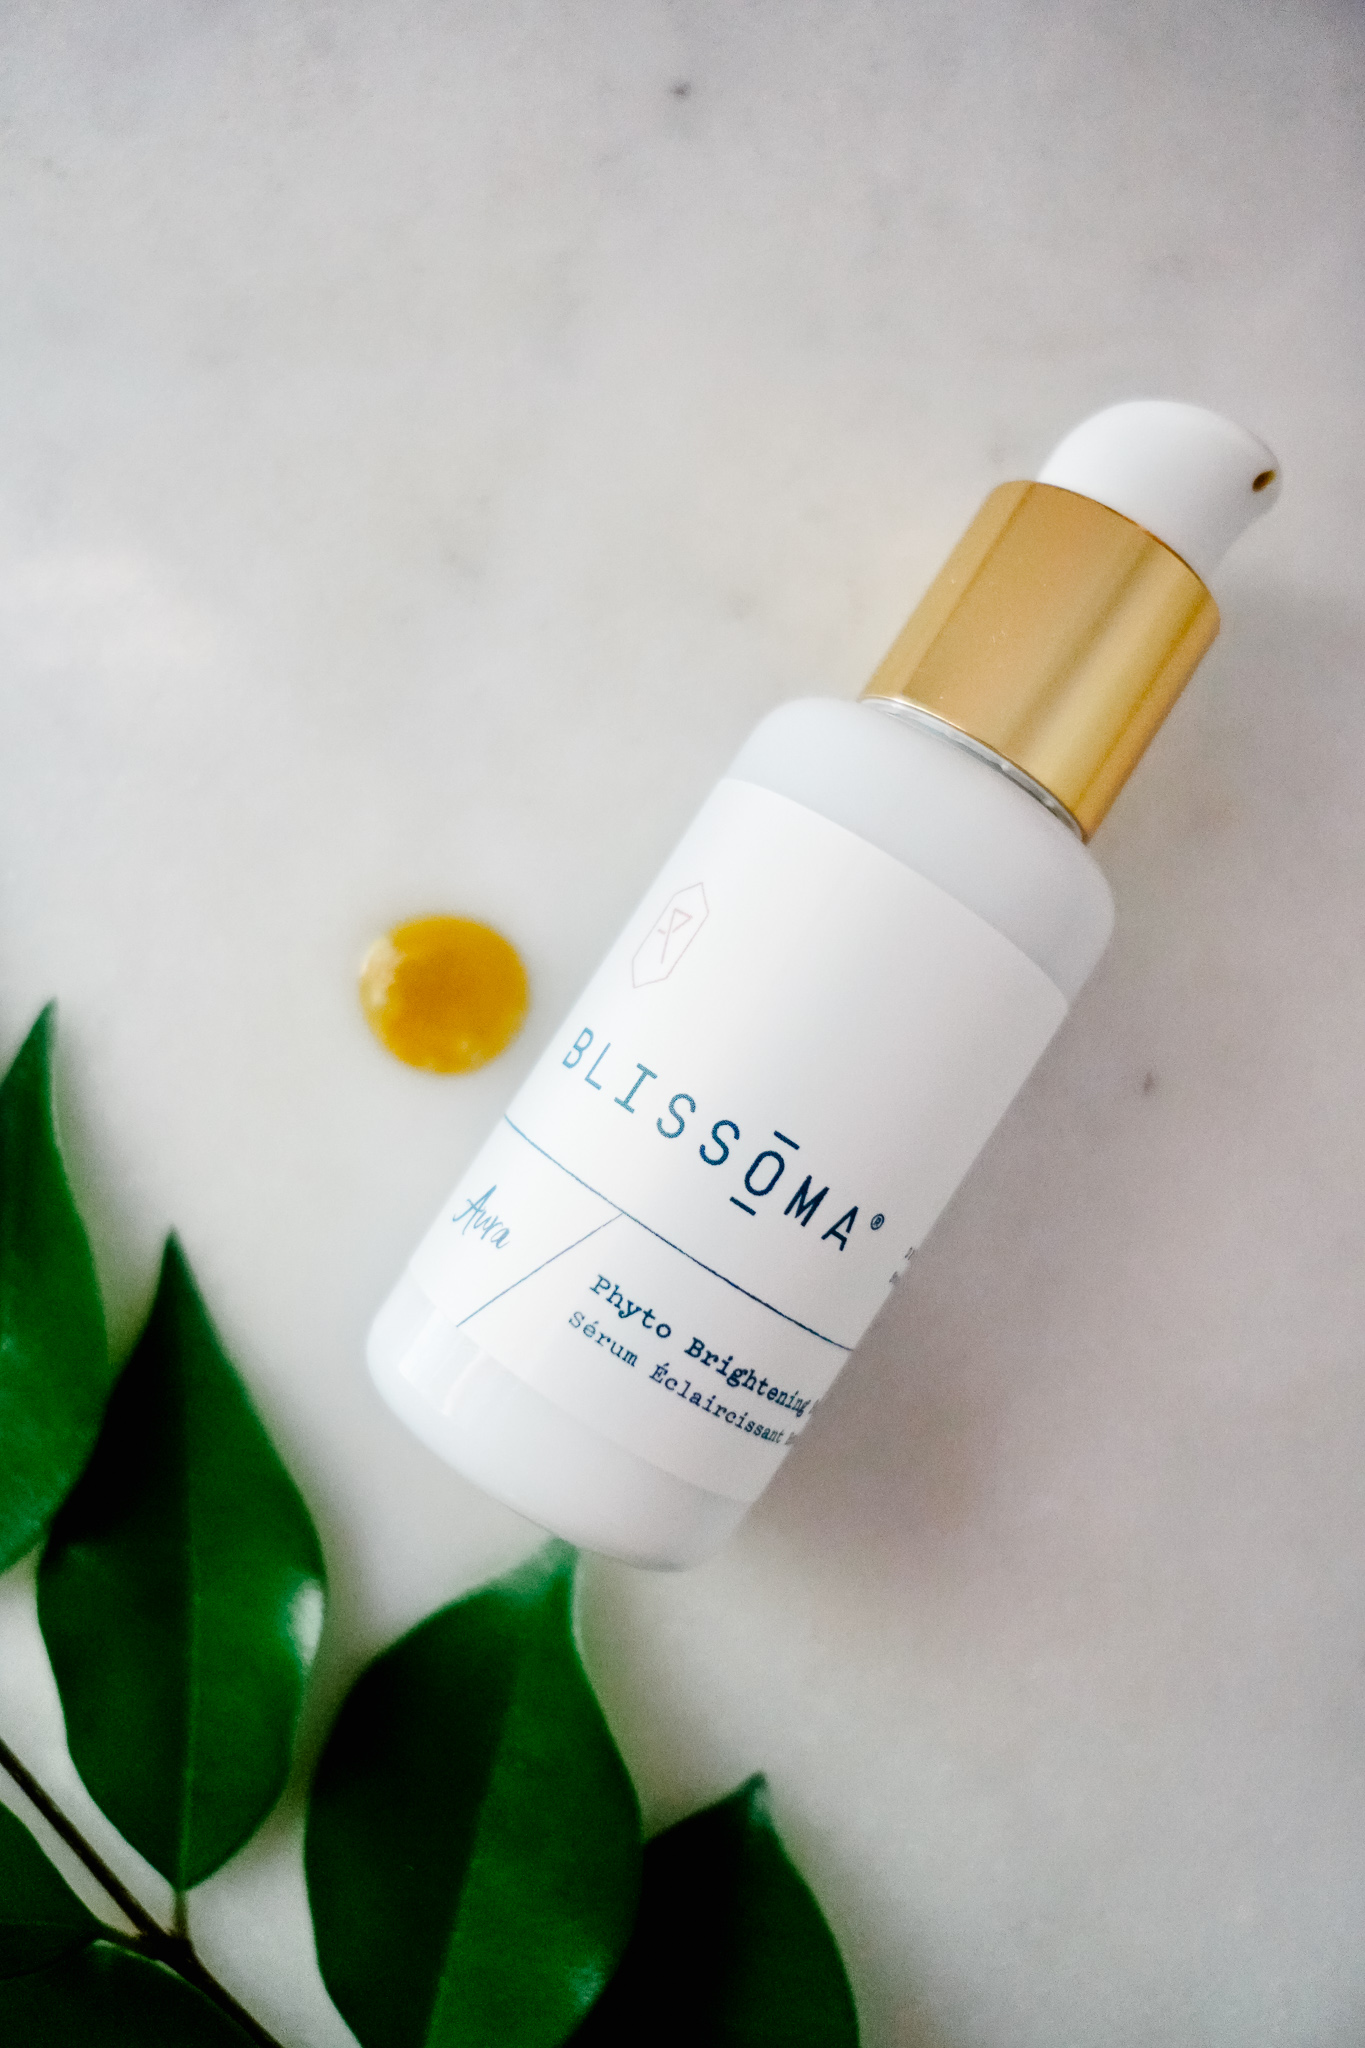 Phyto Brightening Serum from the May Beauty Heroes with Blissoma